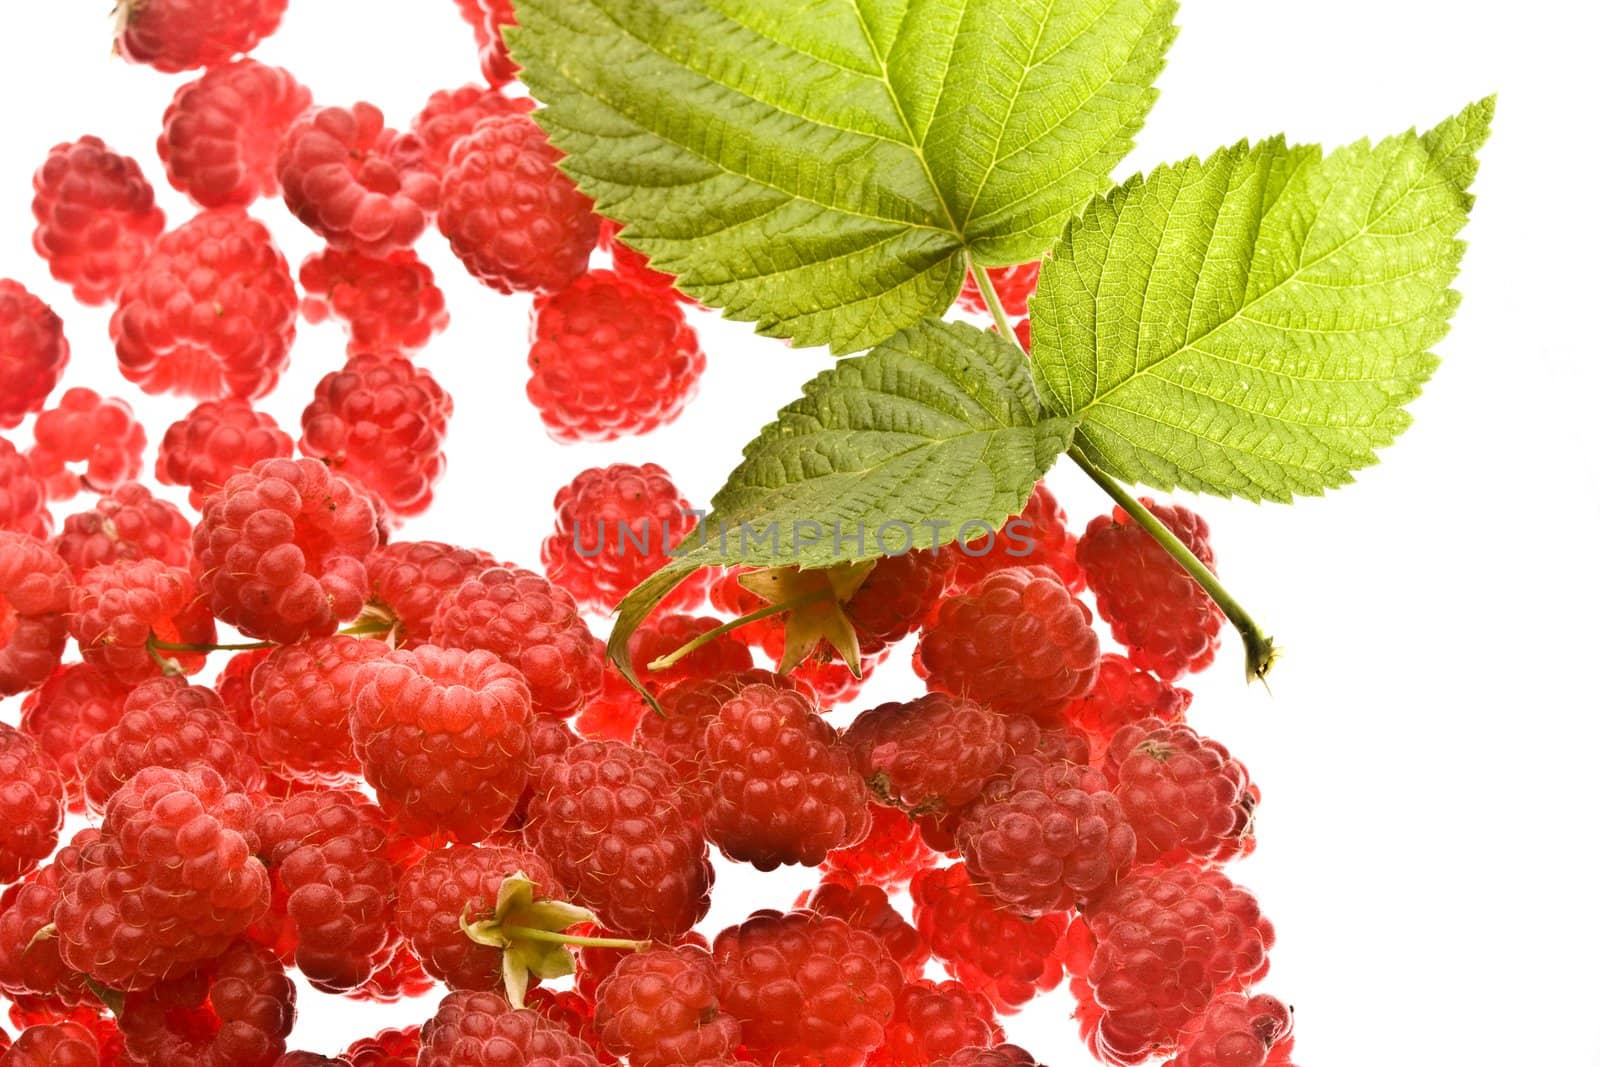 Red raspberry with green leaf on the white background